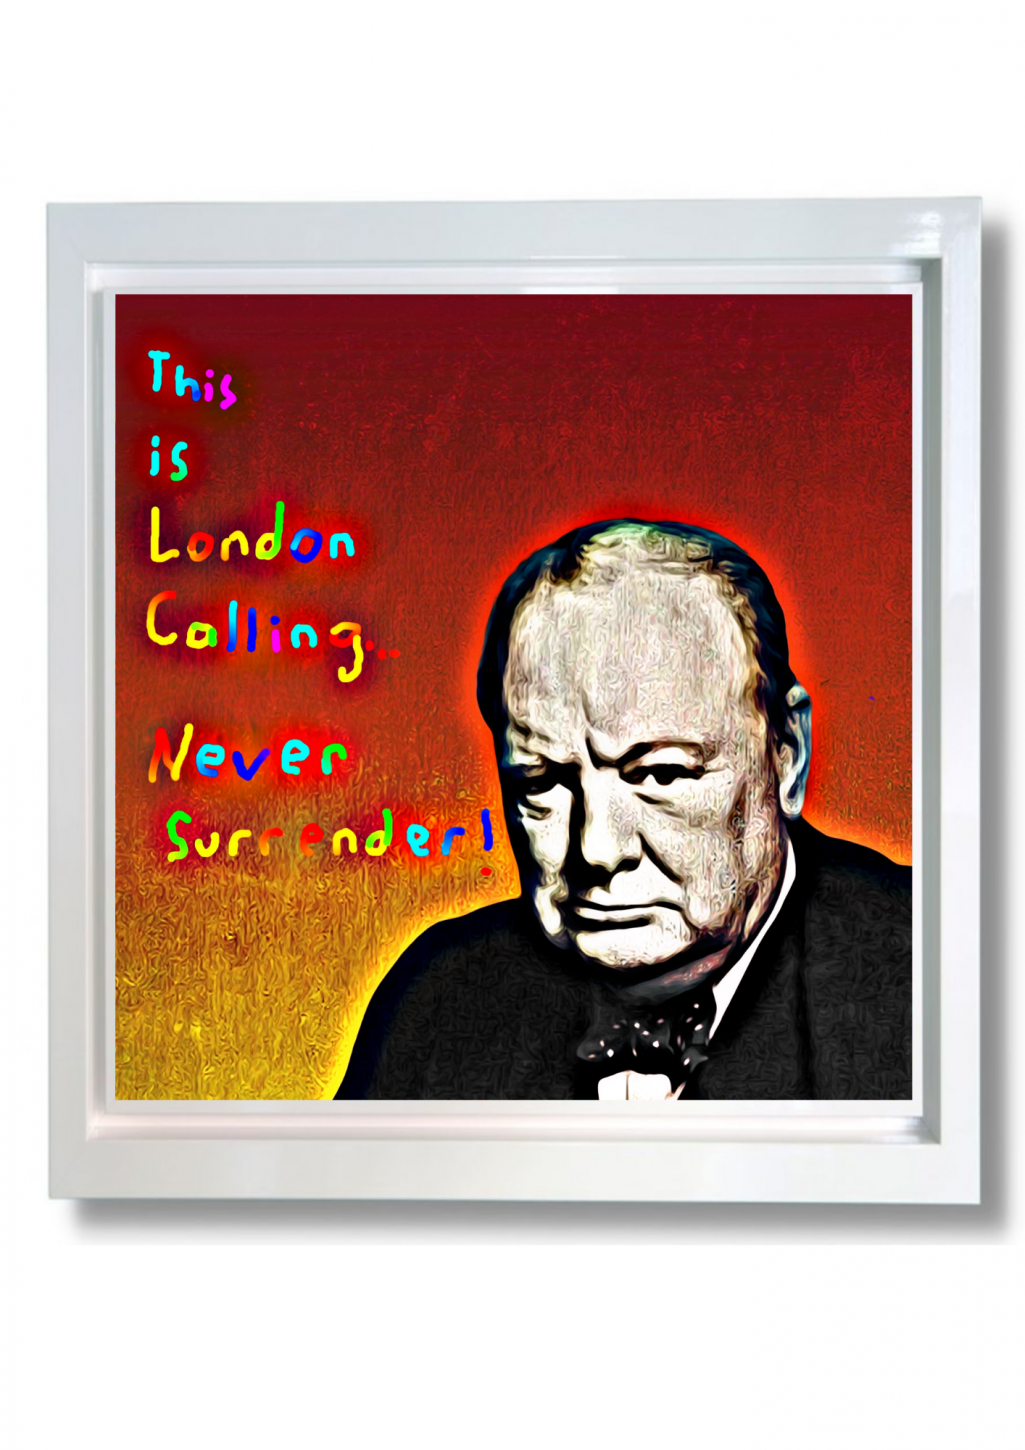 Alex Echo - 'This Is London Calling' -  Framed Limited Edition